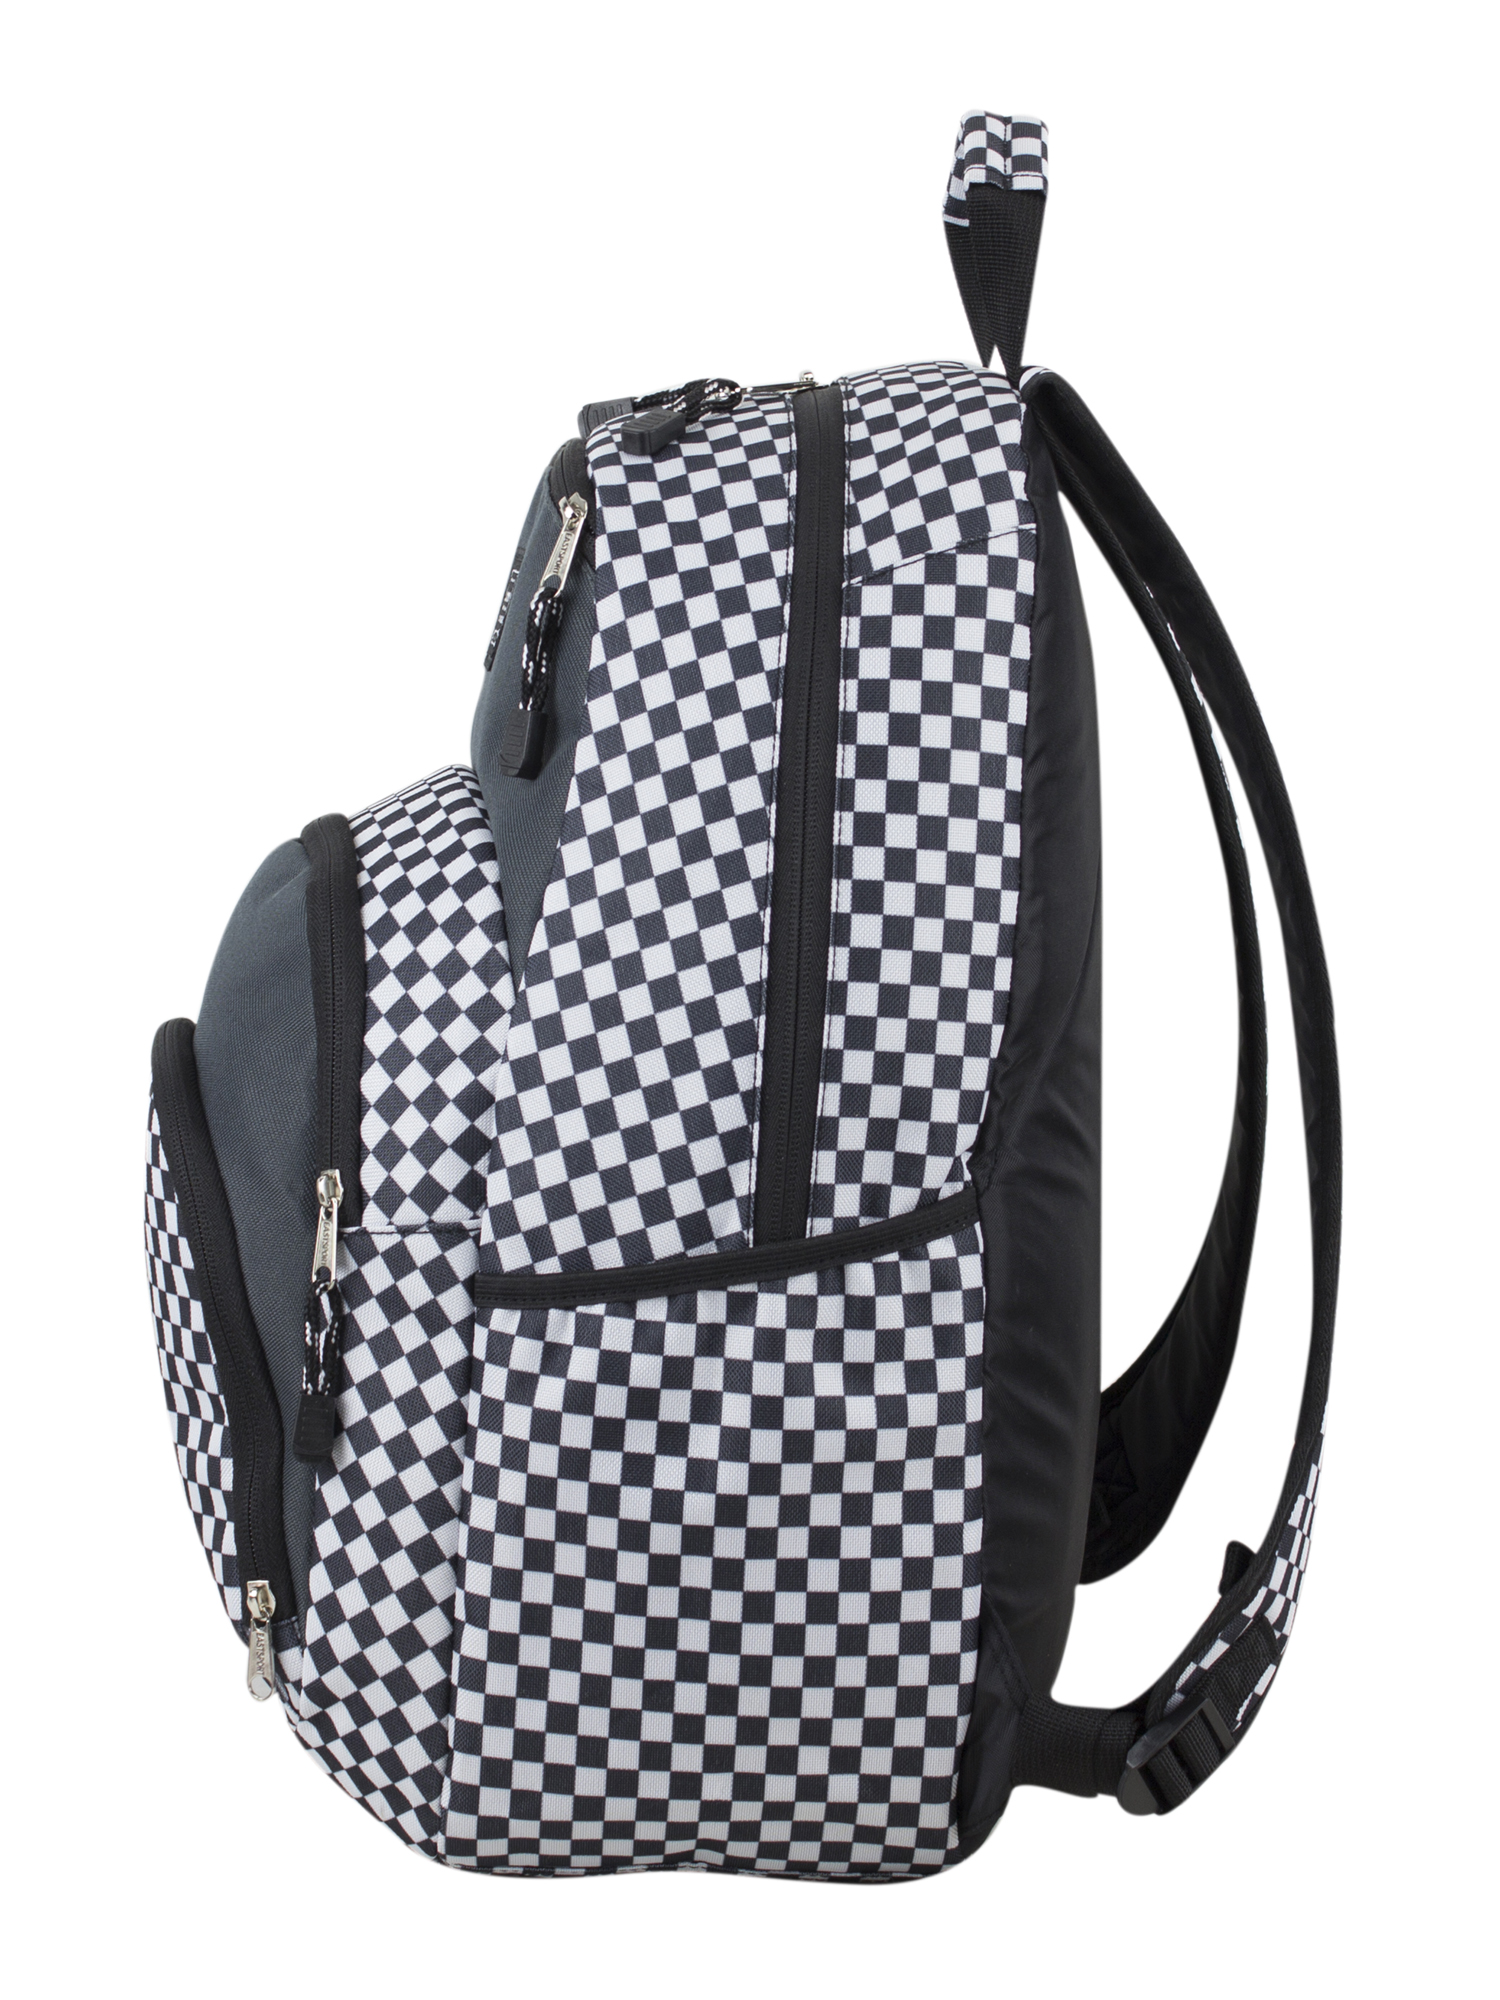 Eastsport Sport Tier Athleisure Checker Plaid Backpack with Adjustable Straps - image 3 of 7